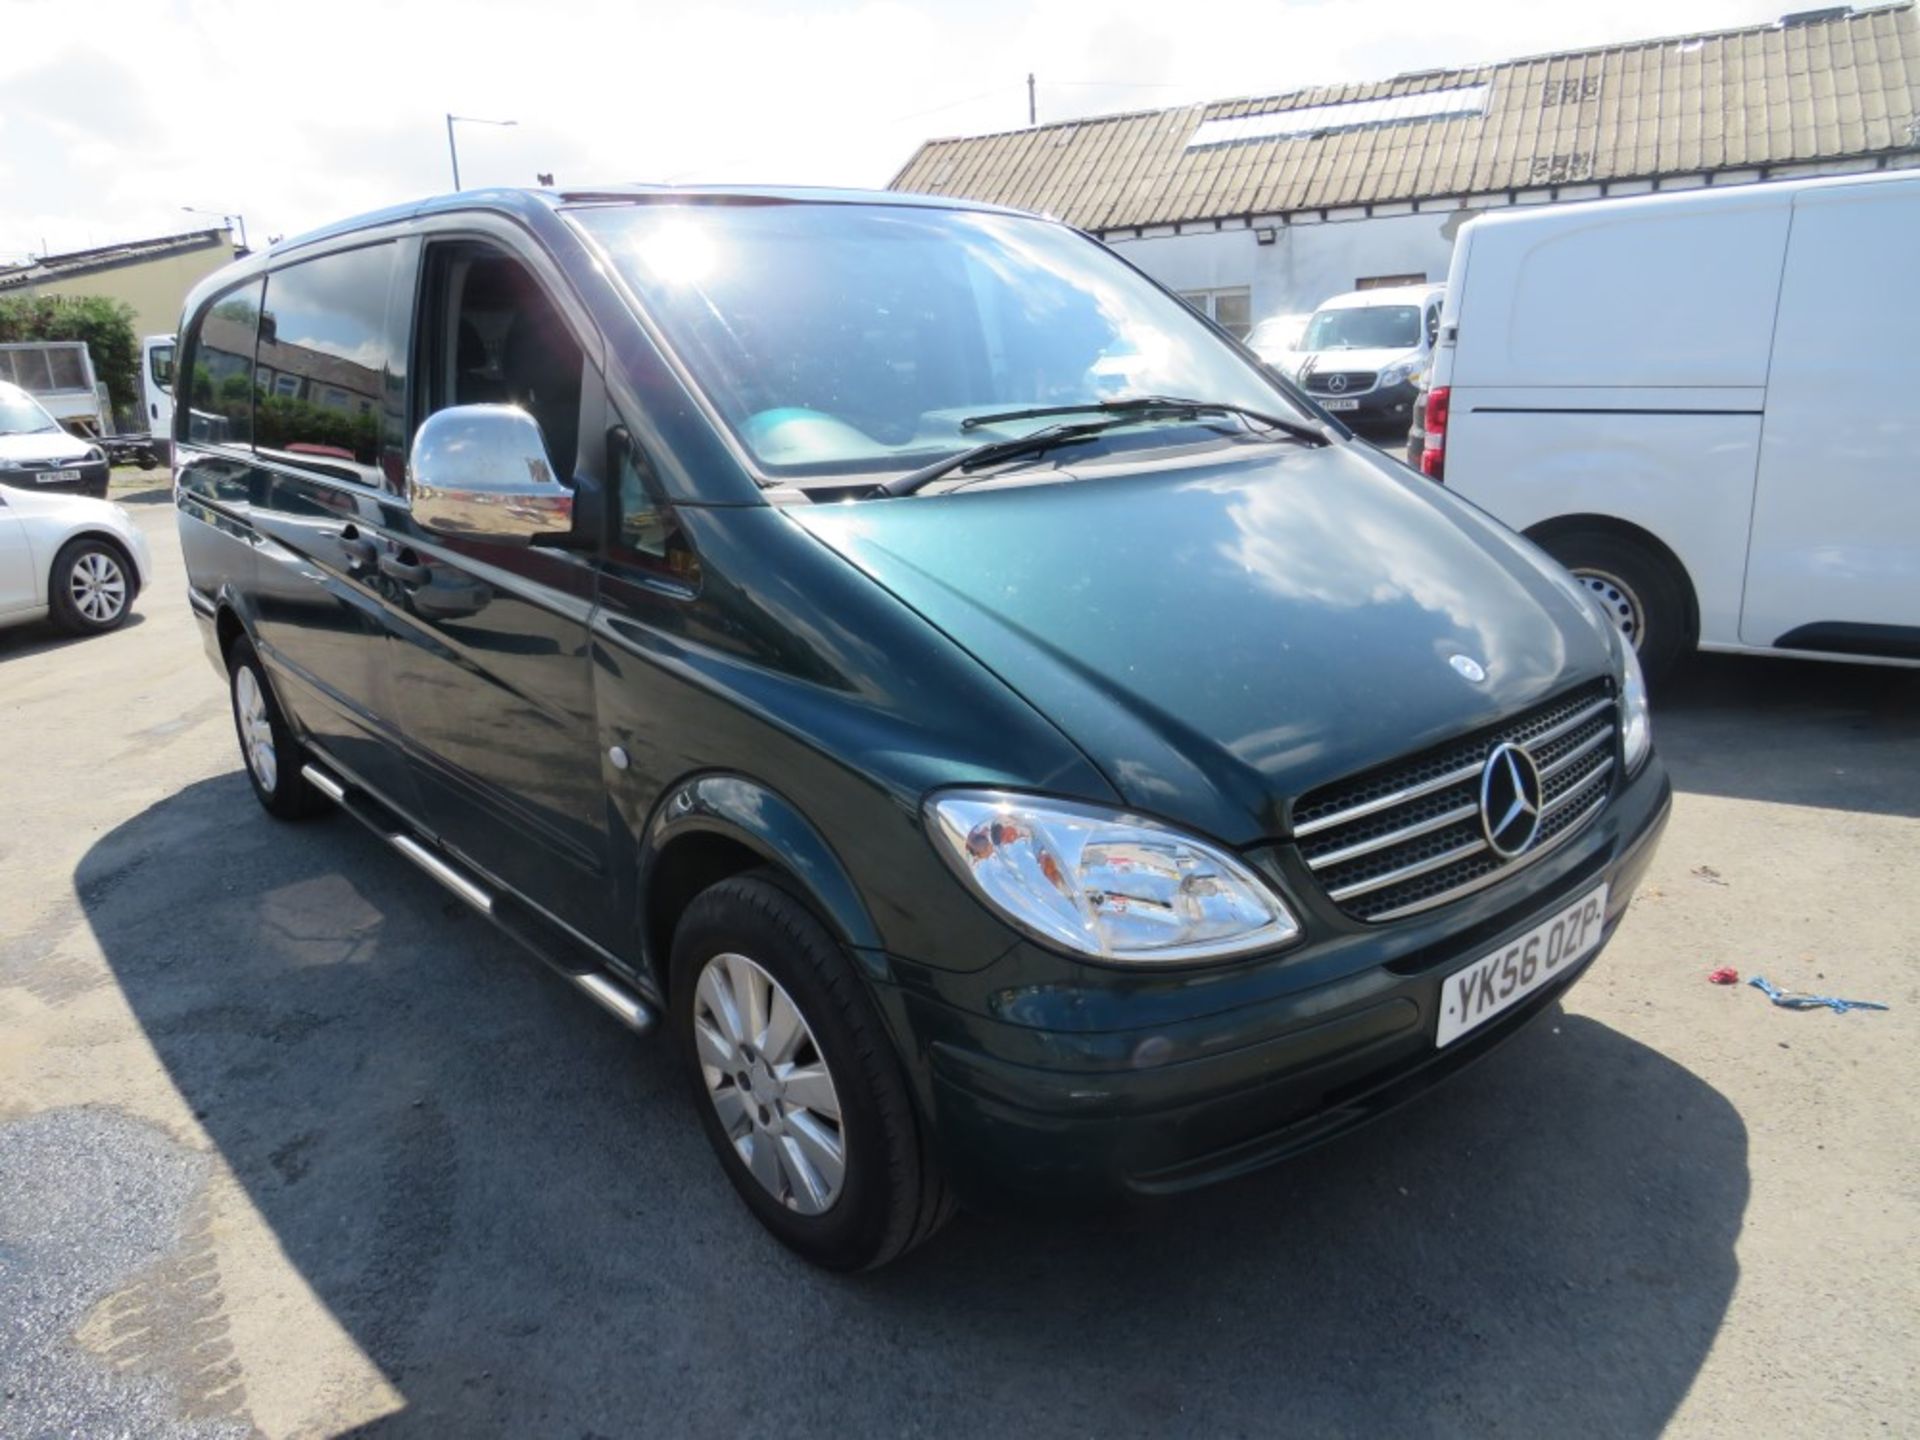 56 reg MERCEDES VITO 111 CDI LONG, 321099M NOT WARRANTED, V5 HERE, 2 FORMER KEEPERS [NO VAT]